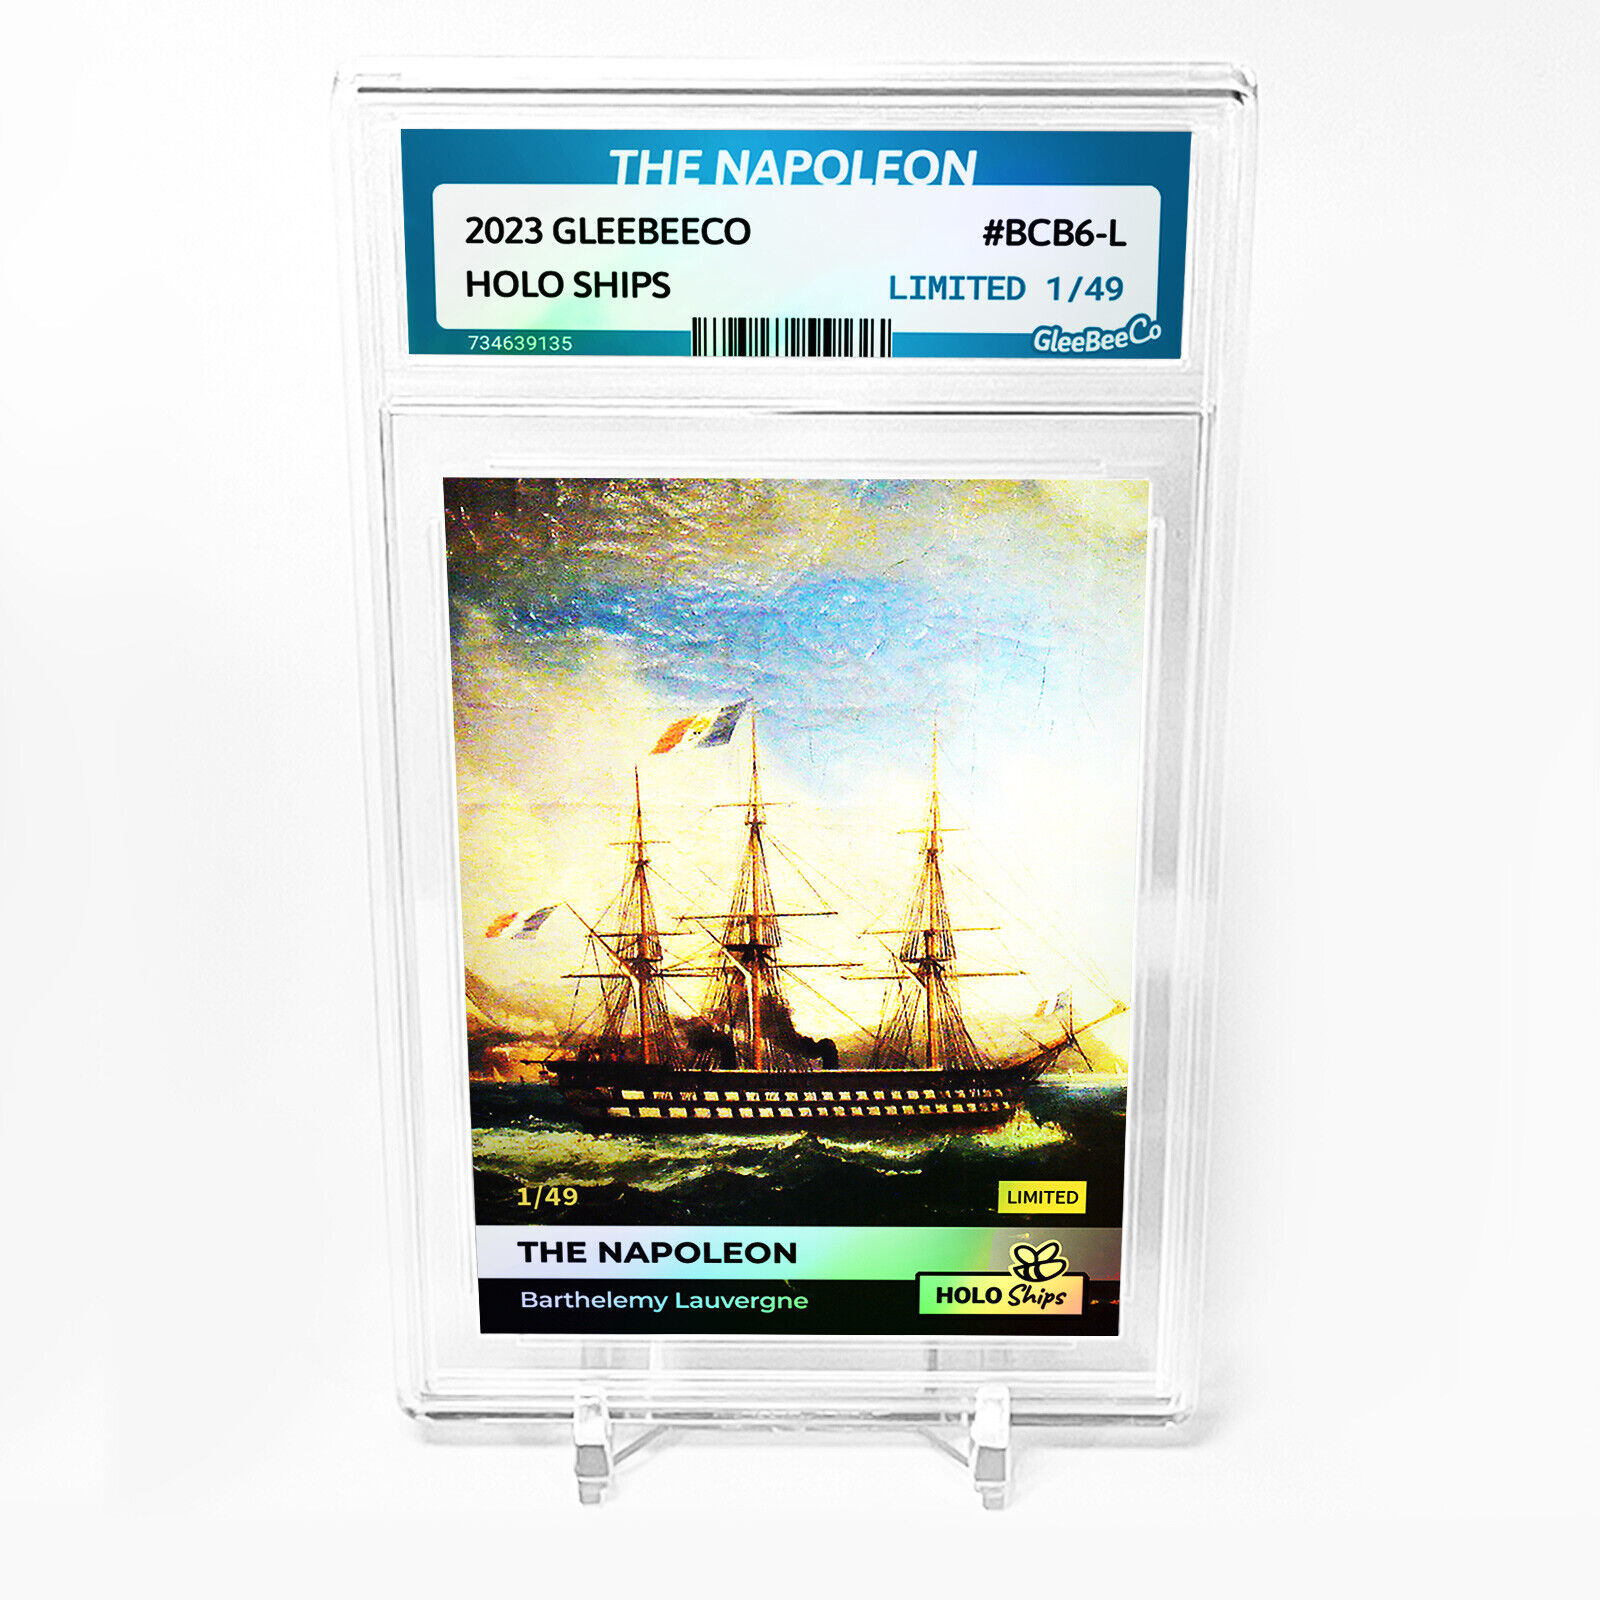 THE NAPOLEON Card GleeBeeCo Holo Ships #BCB6-L Limited to Only /49 - Wonderful